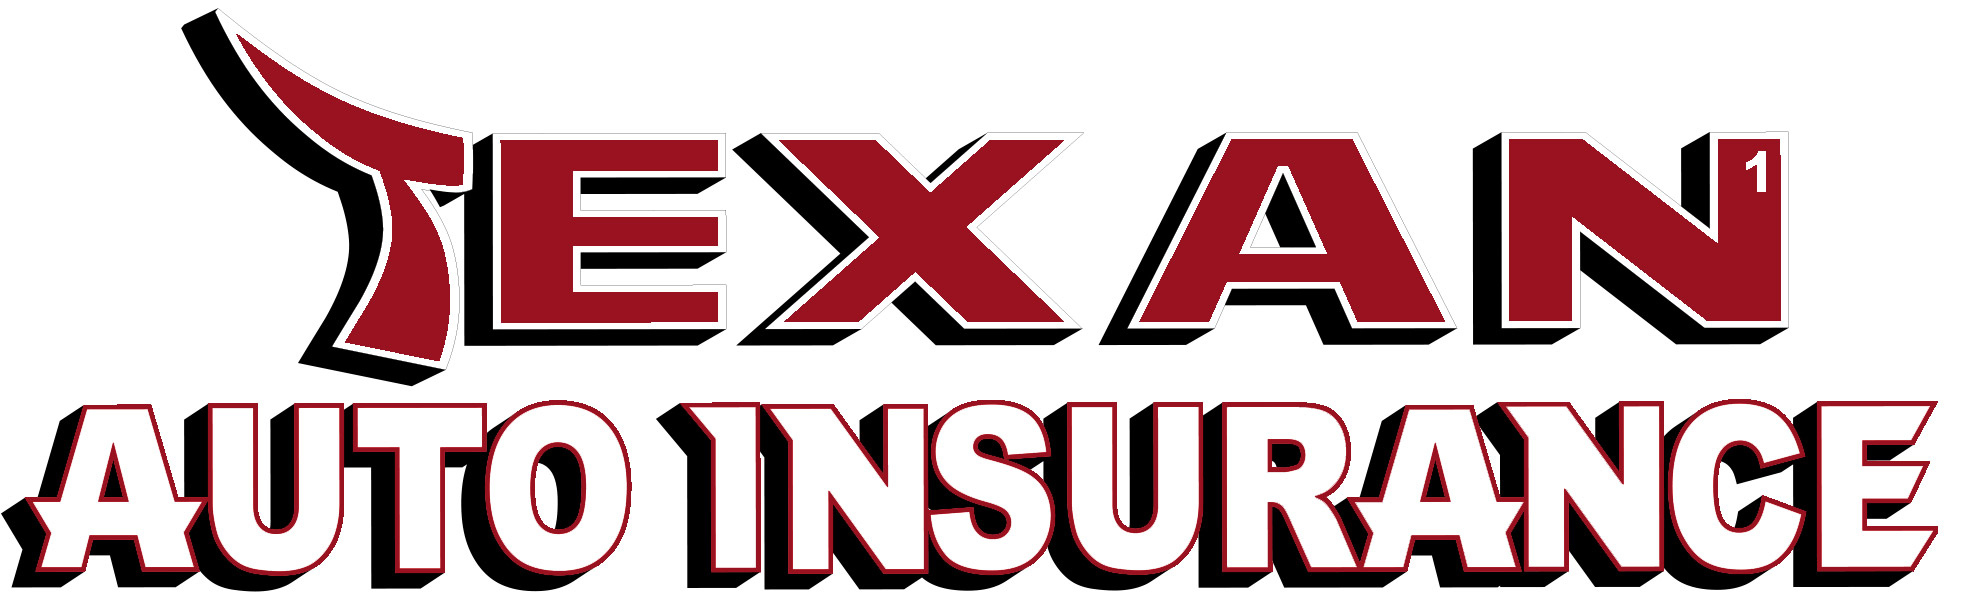 Contact Us Texan Auto Insurance Agency with dimensions 1980 X 600